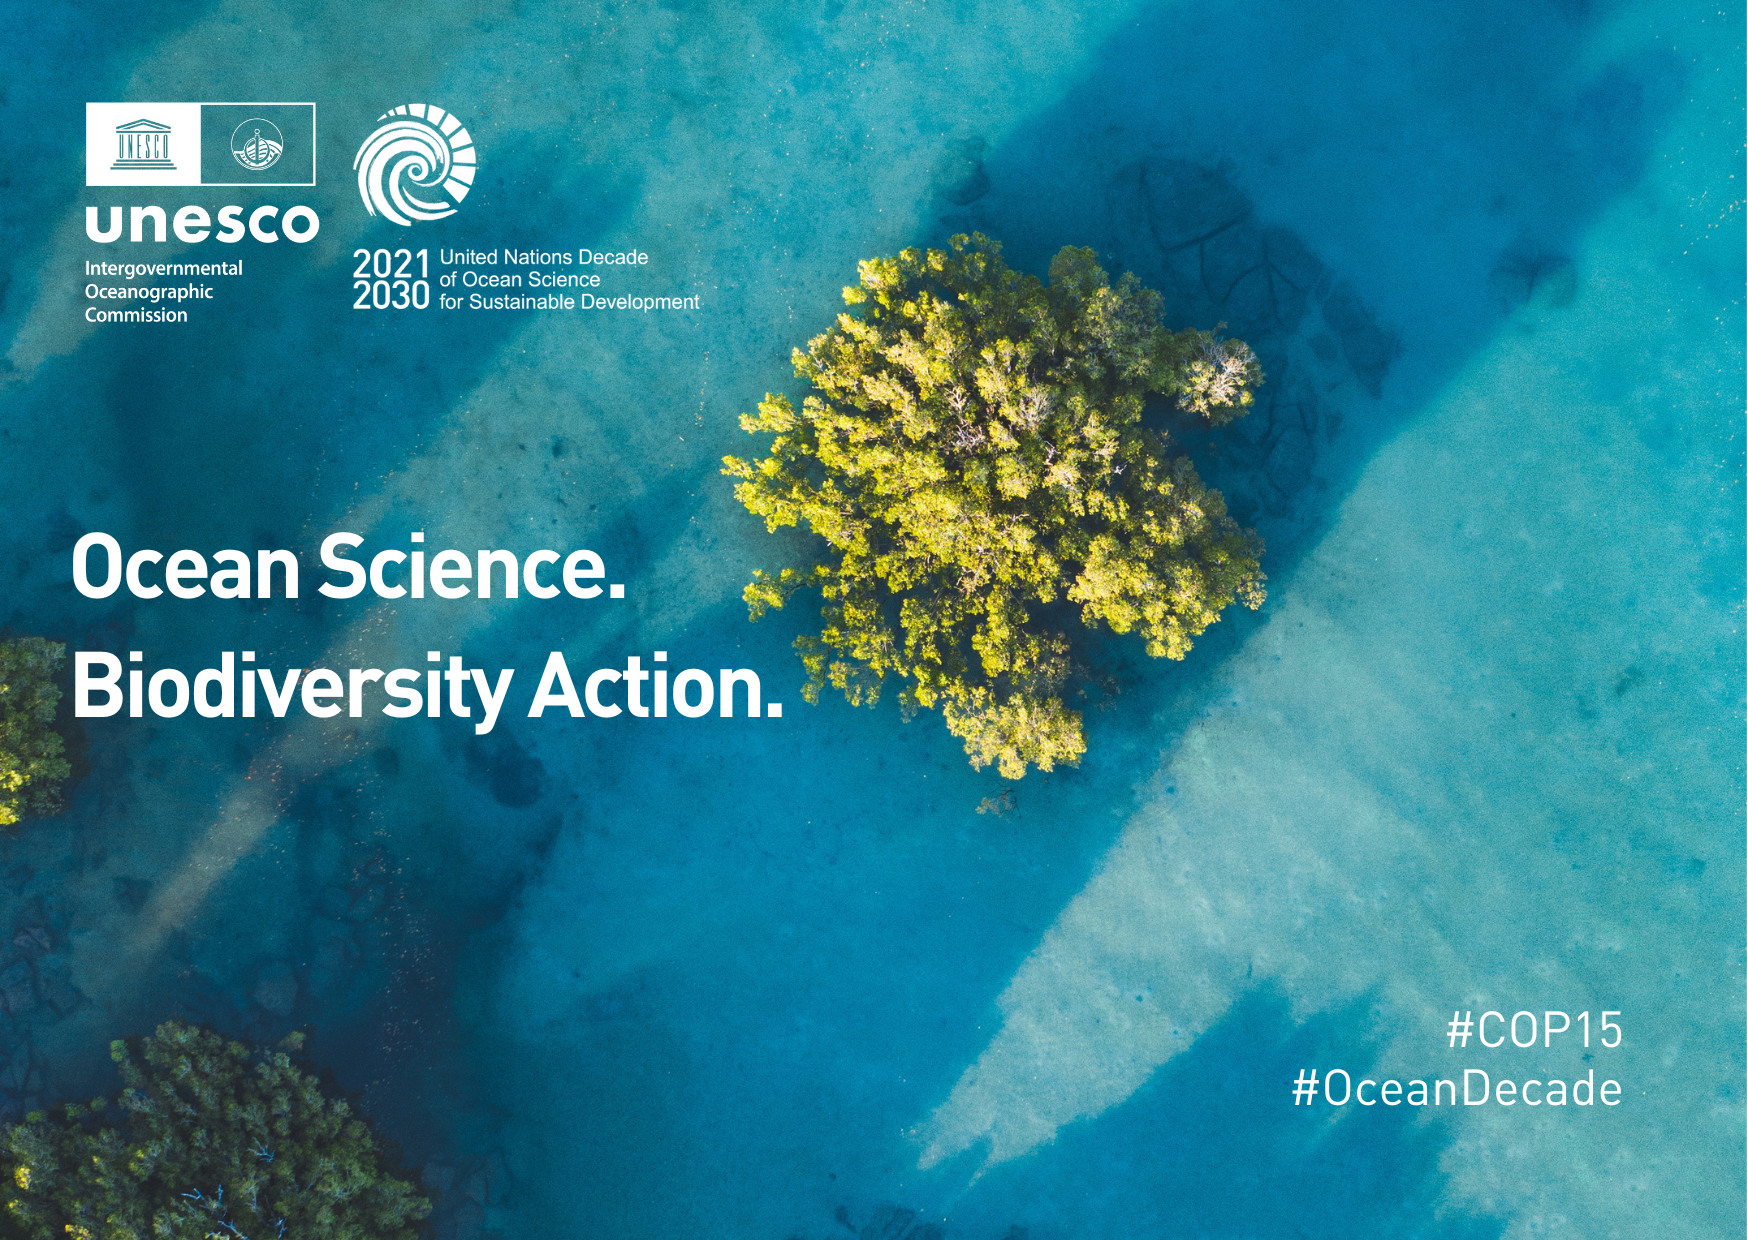 How does the COP15 to the Convention on Biodiversity affect coral